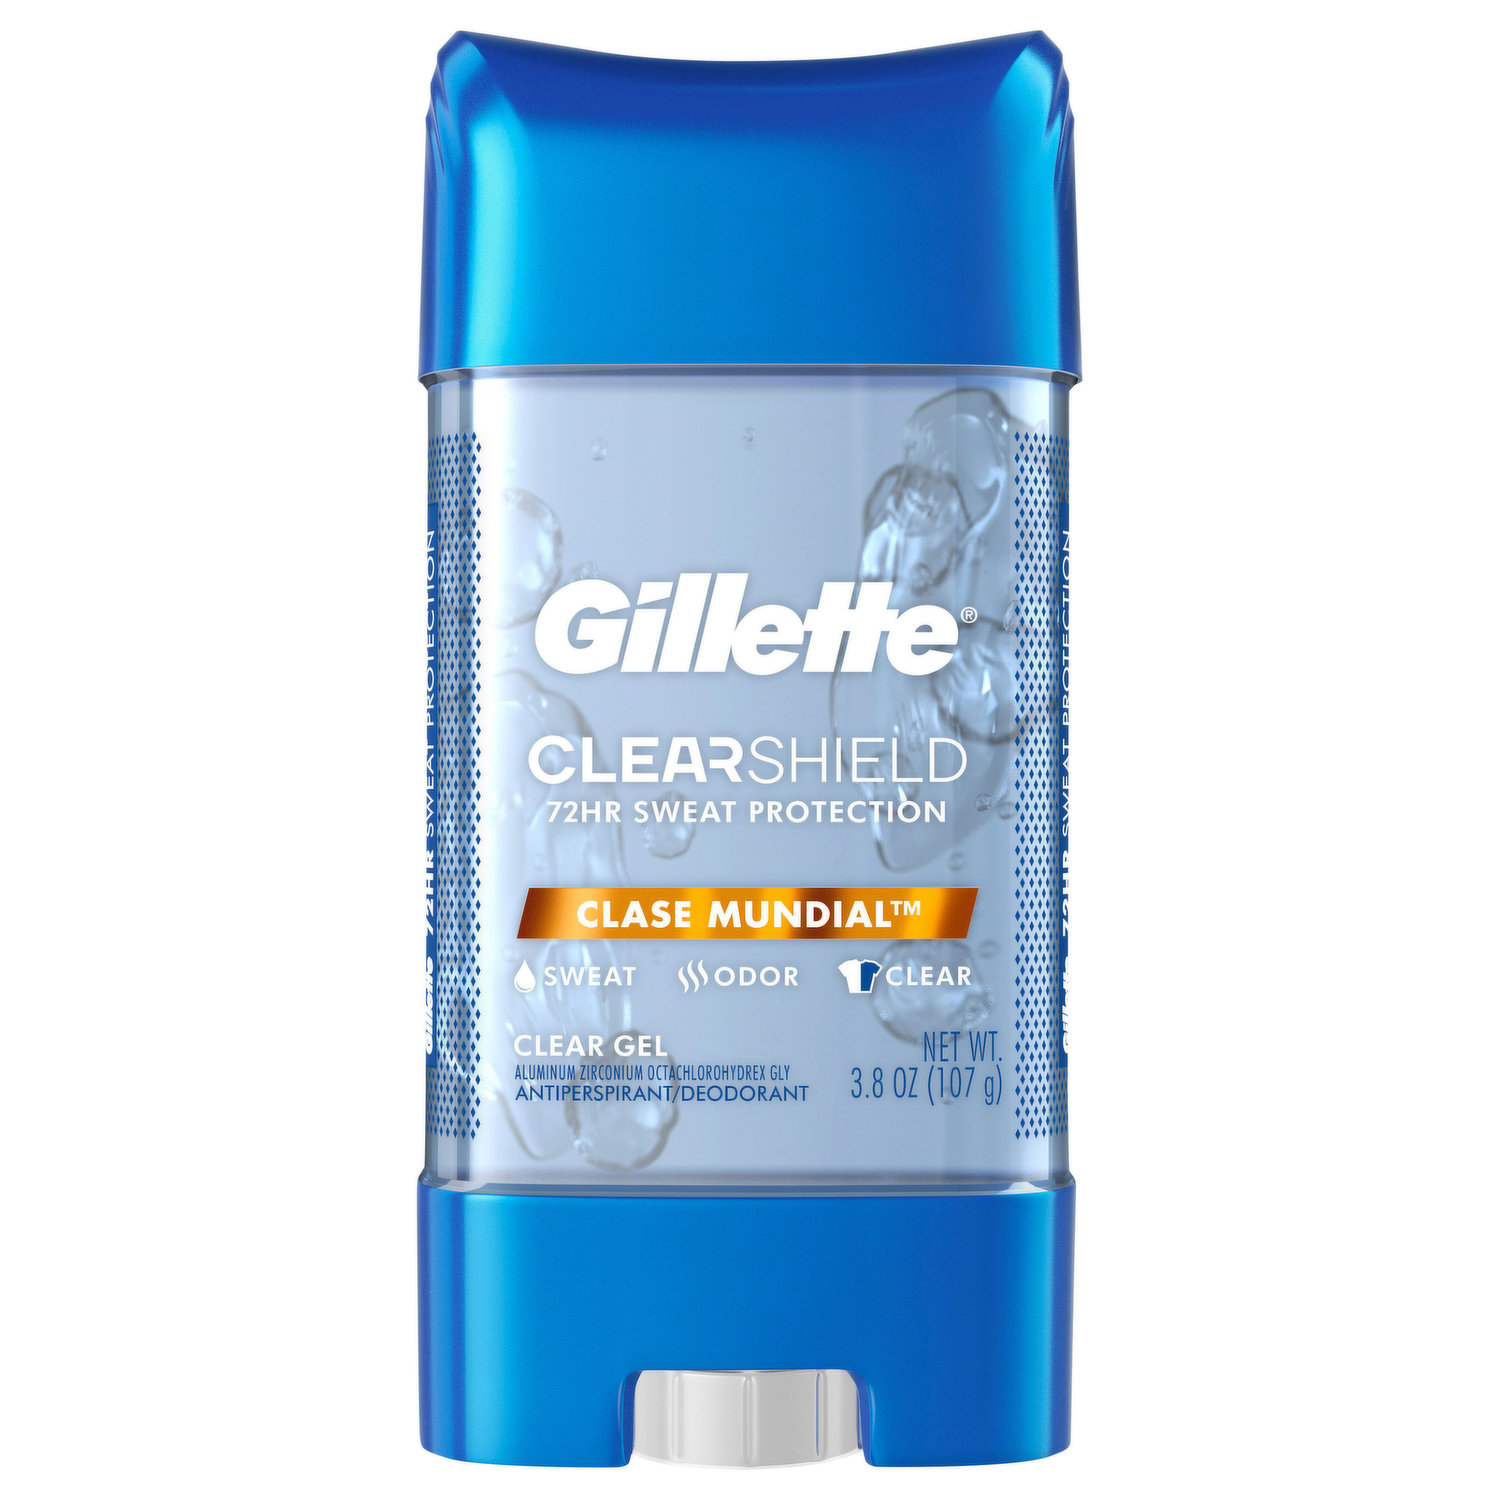 Walmart: $1.97 Gillette Clearshield Deodorant (reg. $5.97; JUST USE YOUR PHONE!)